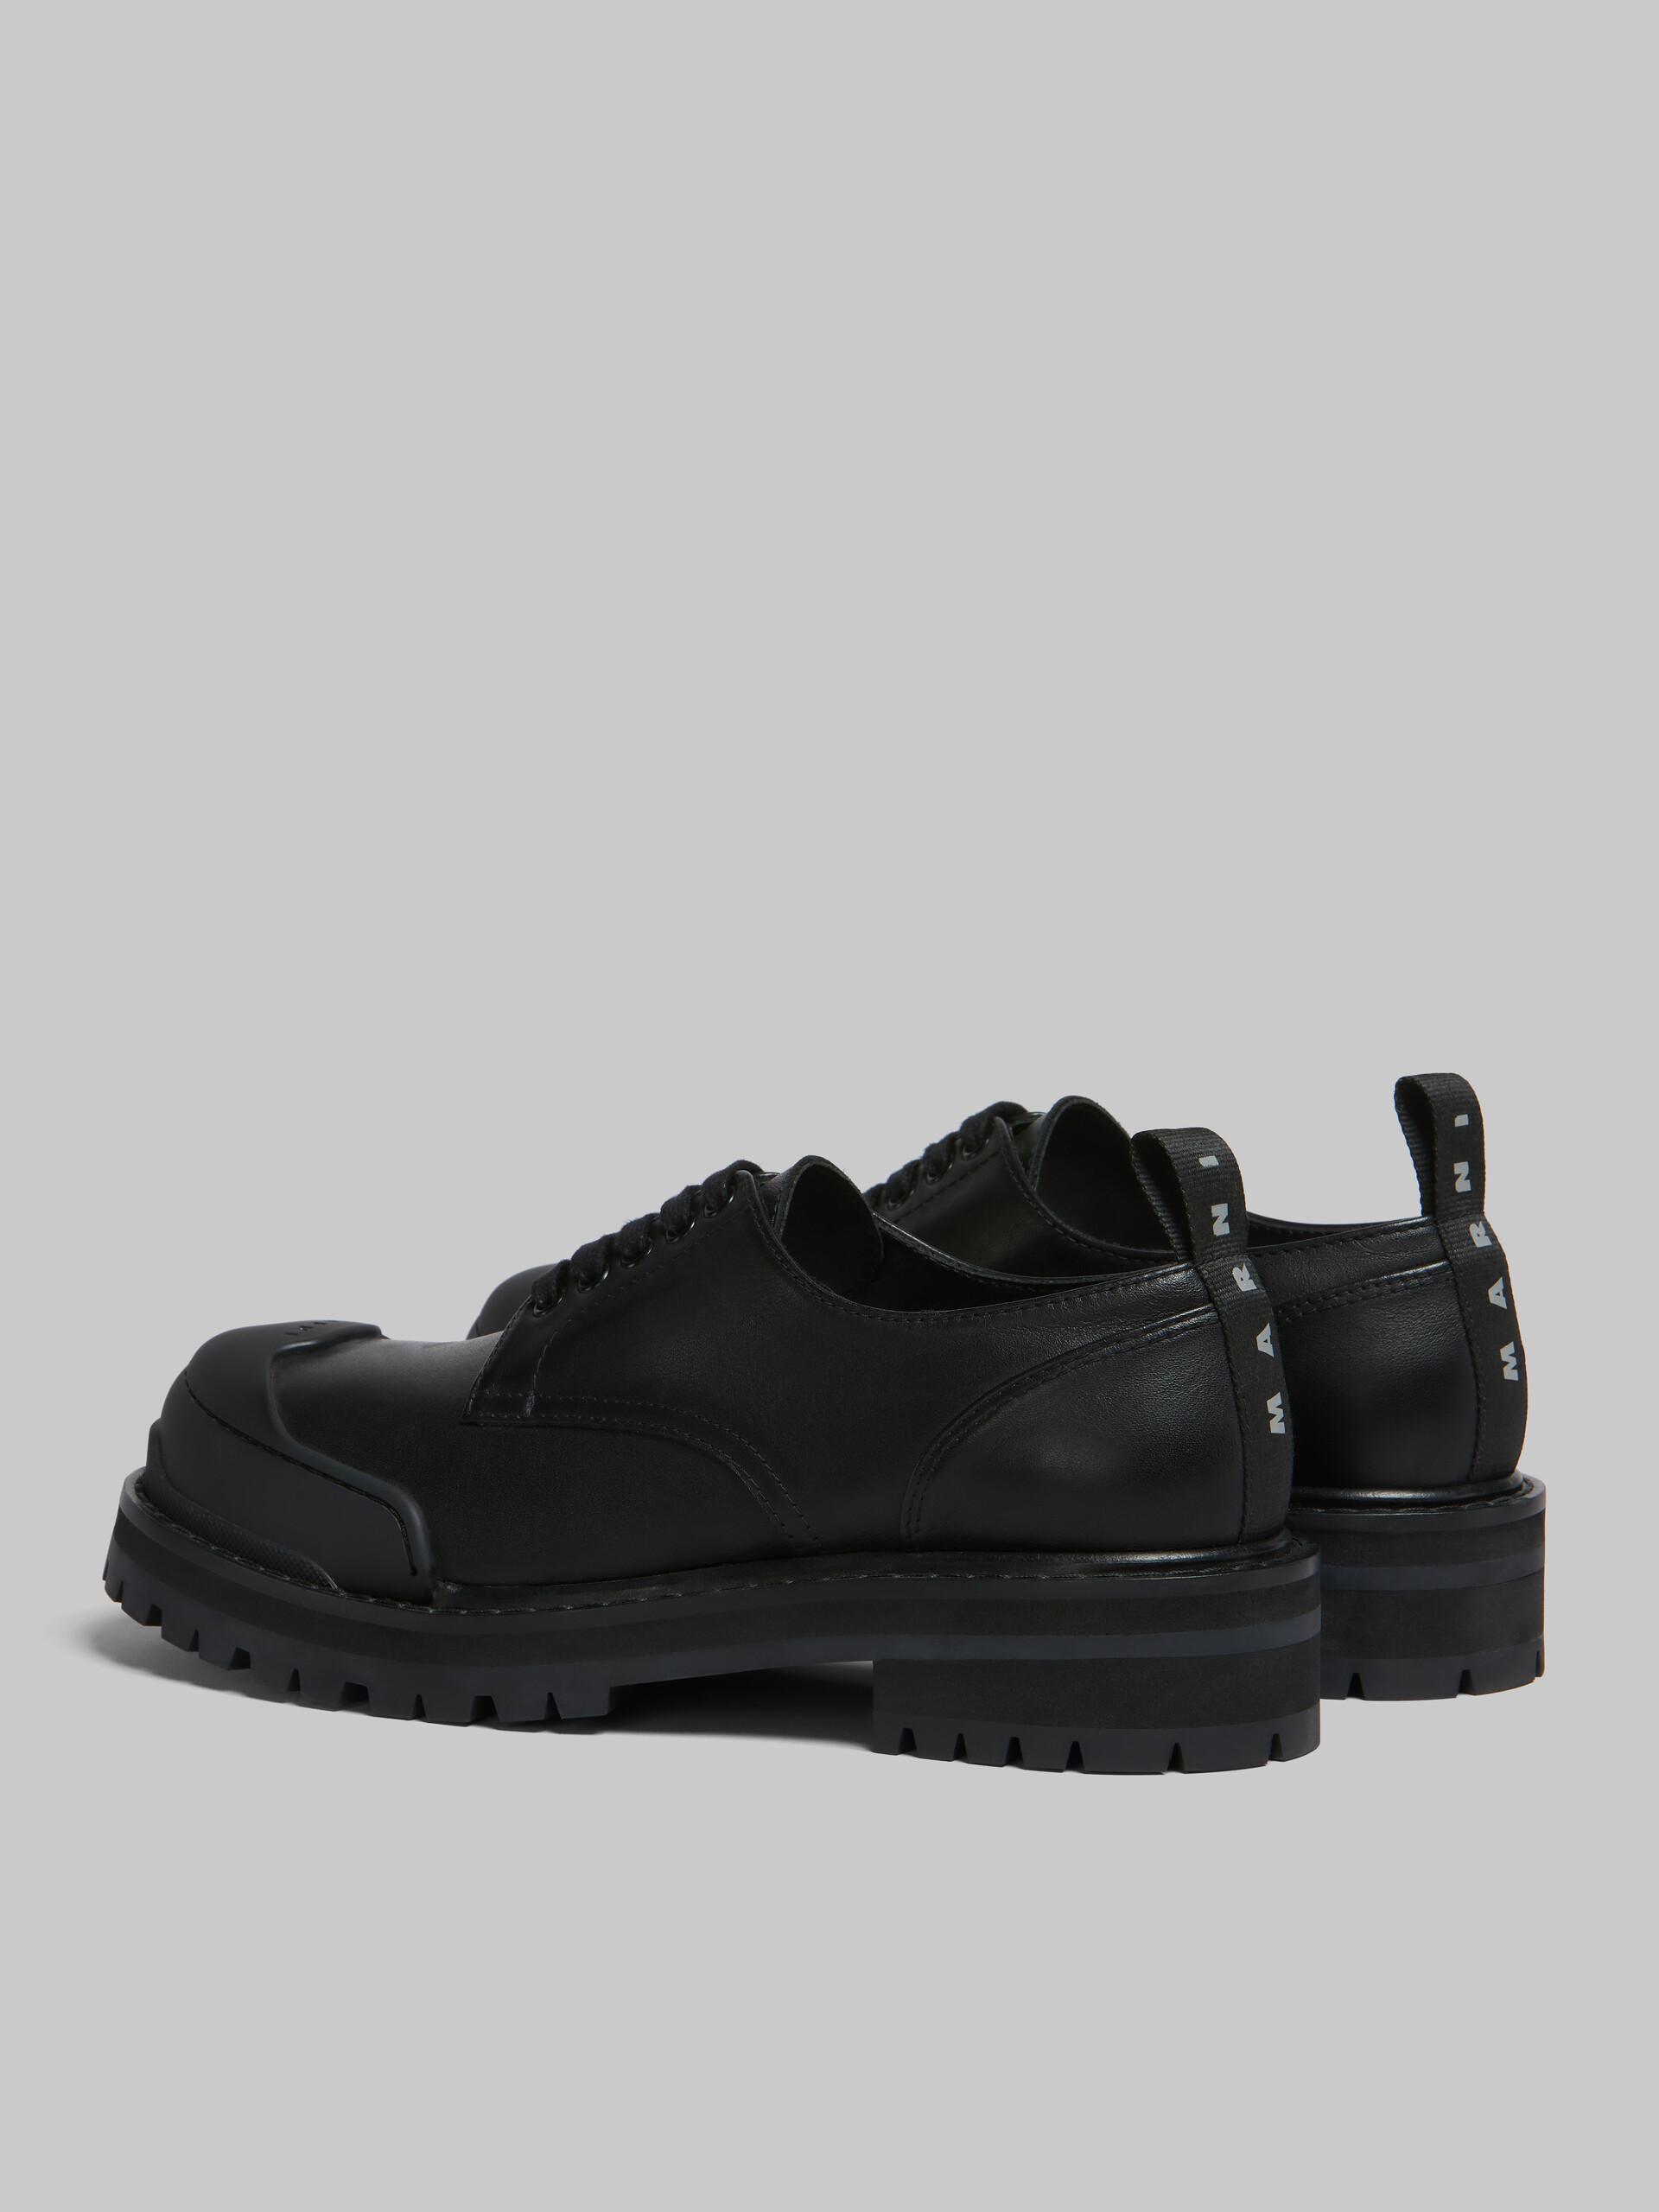 Black leather Dada Army derby shoe - Lace-ups - Image 3